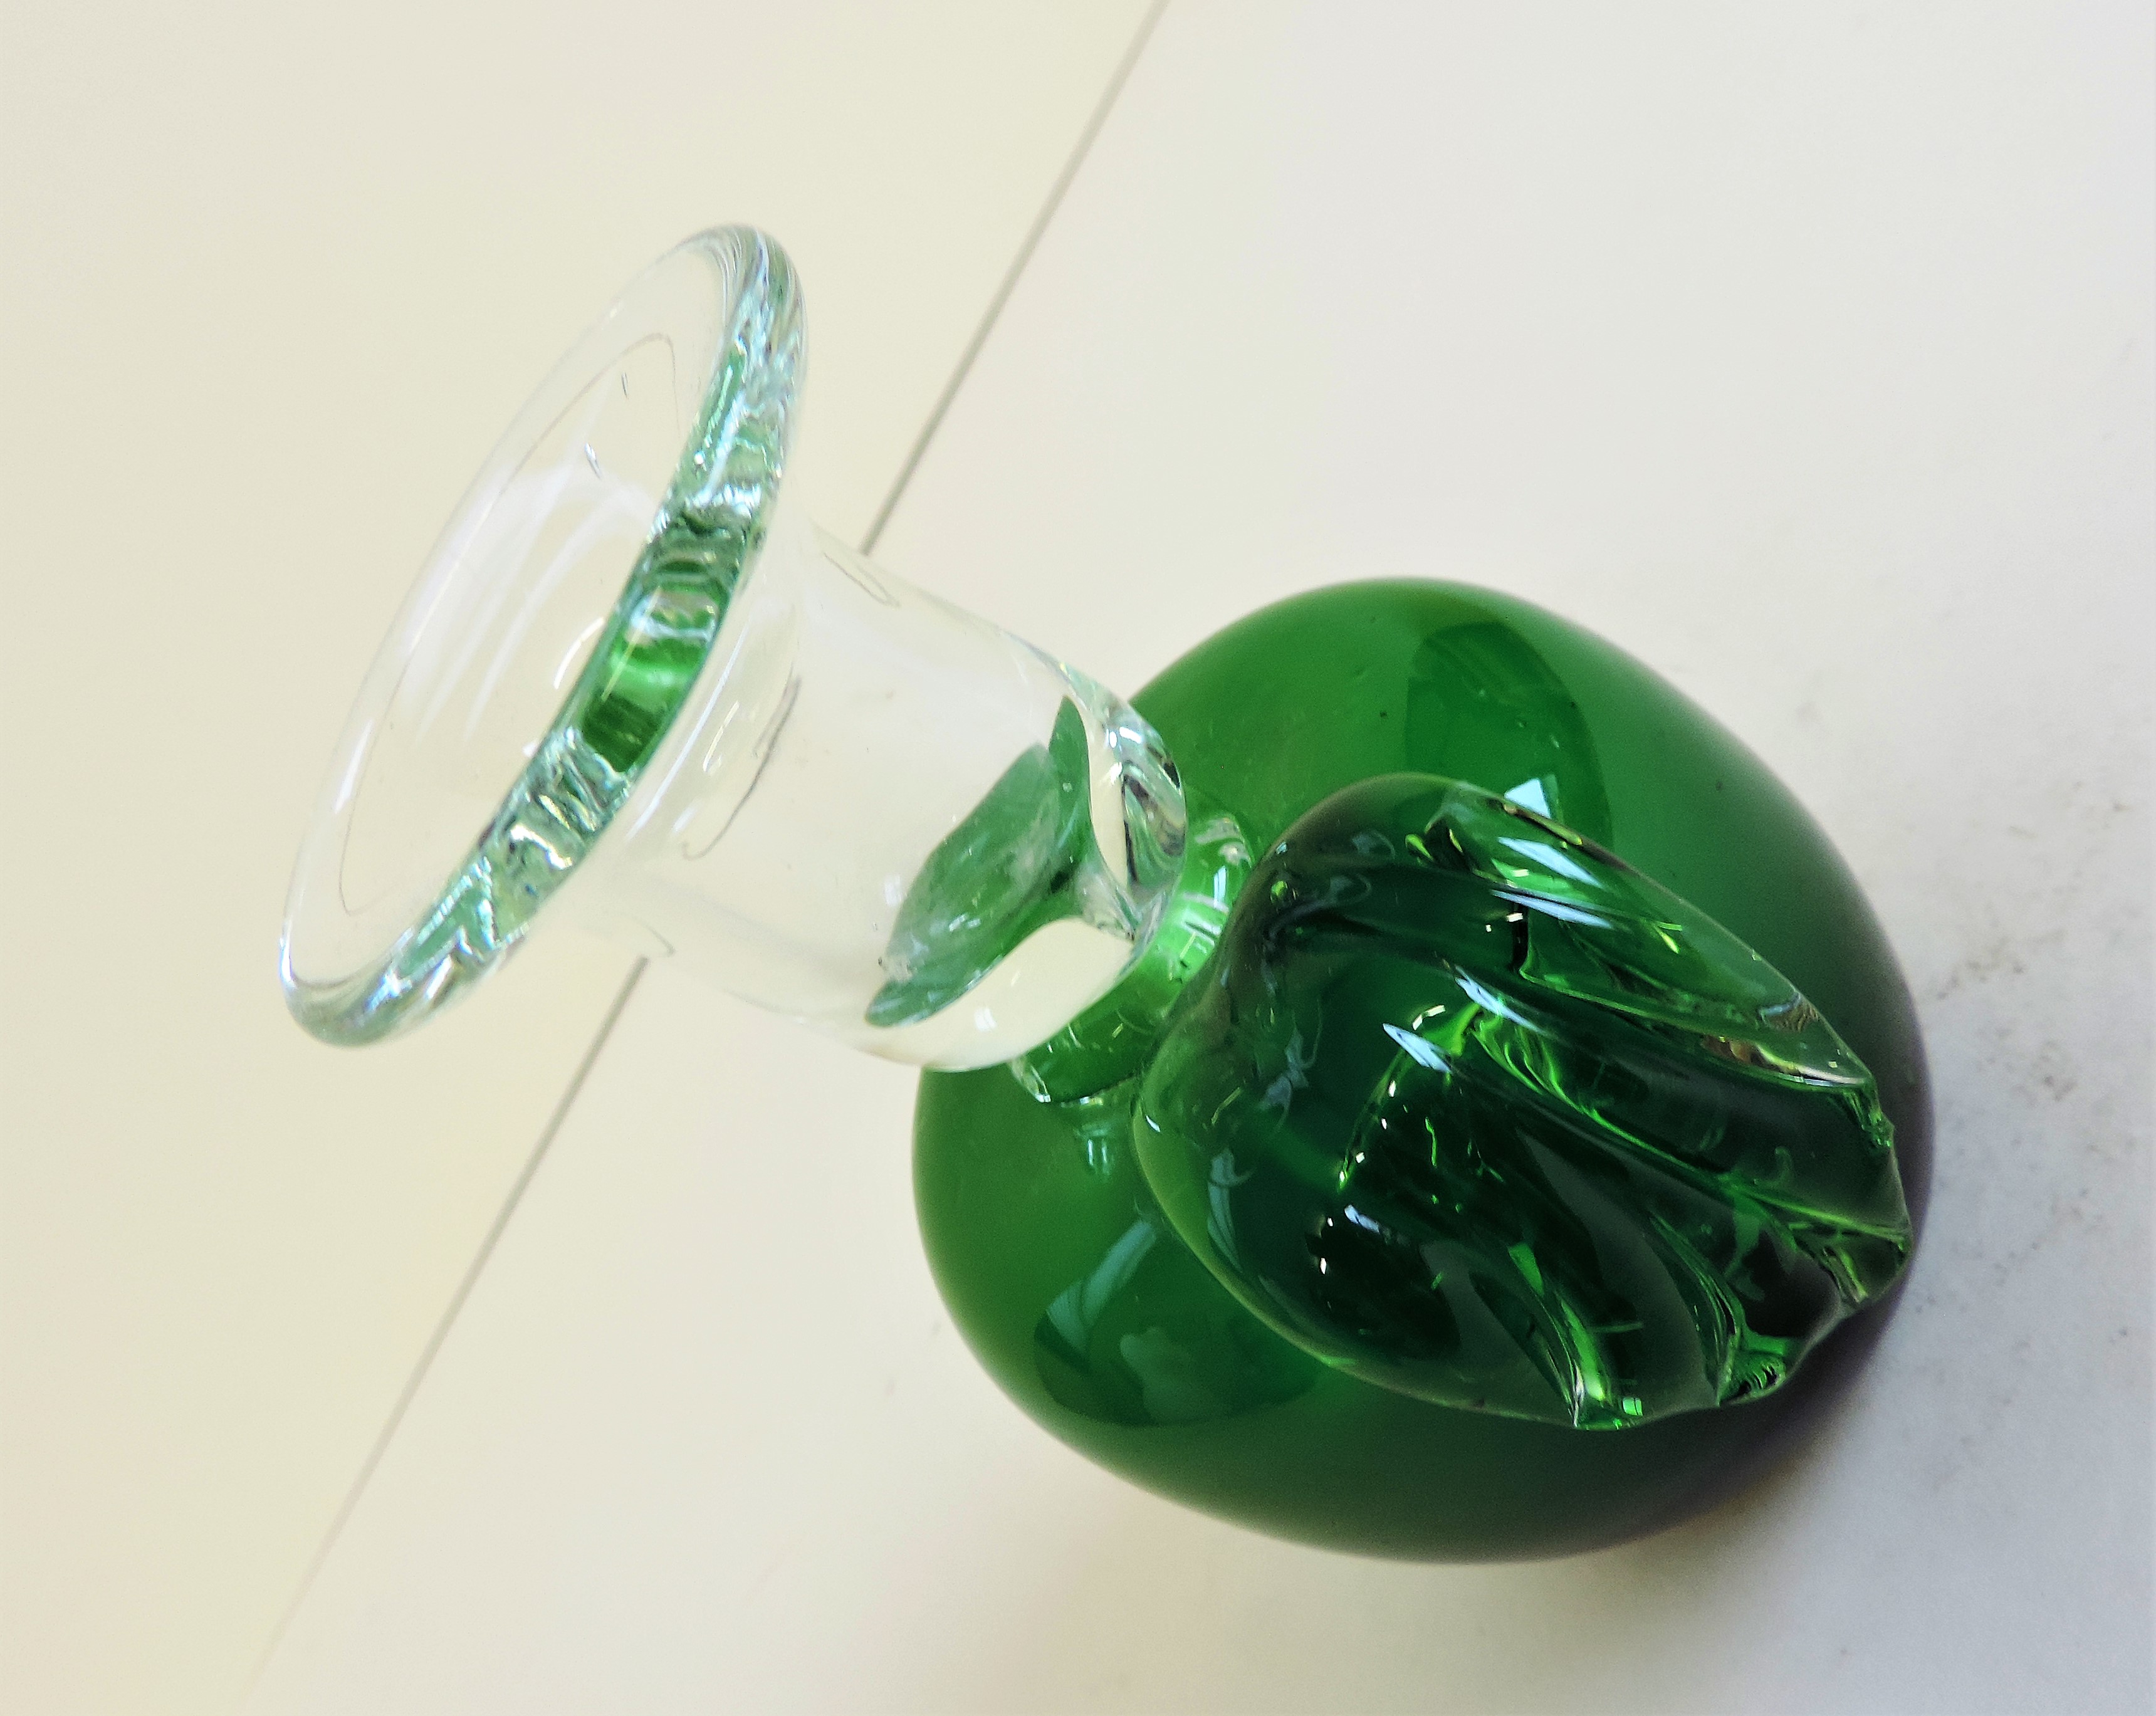 Green Art Glass Apple Shaped Candlestick - Image 3 of 4